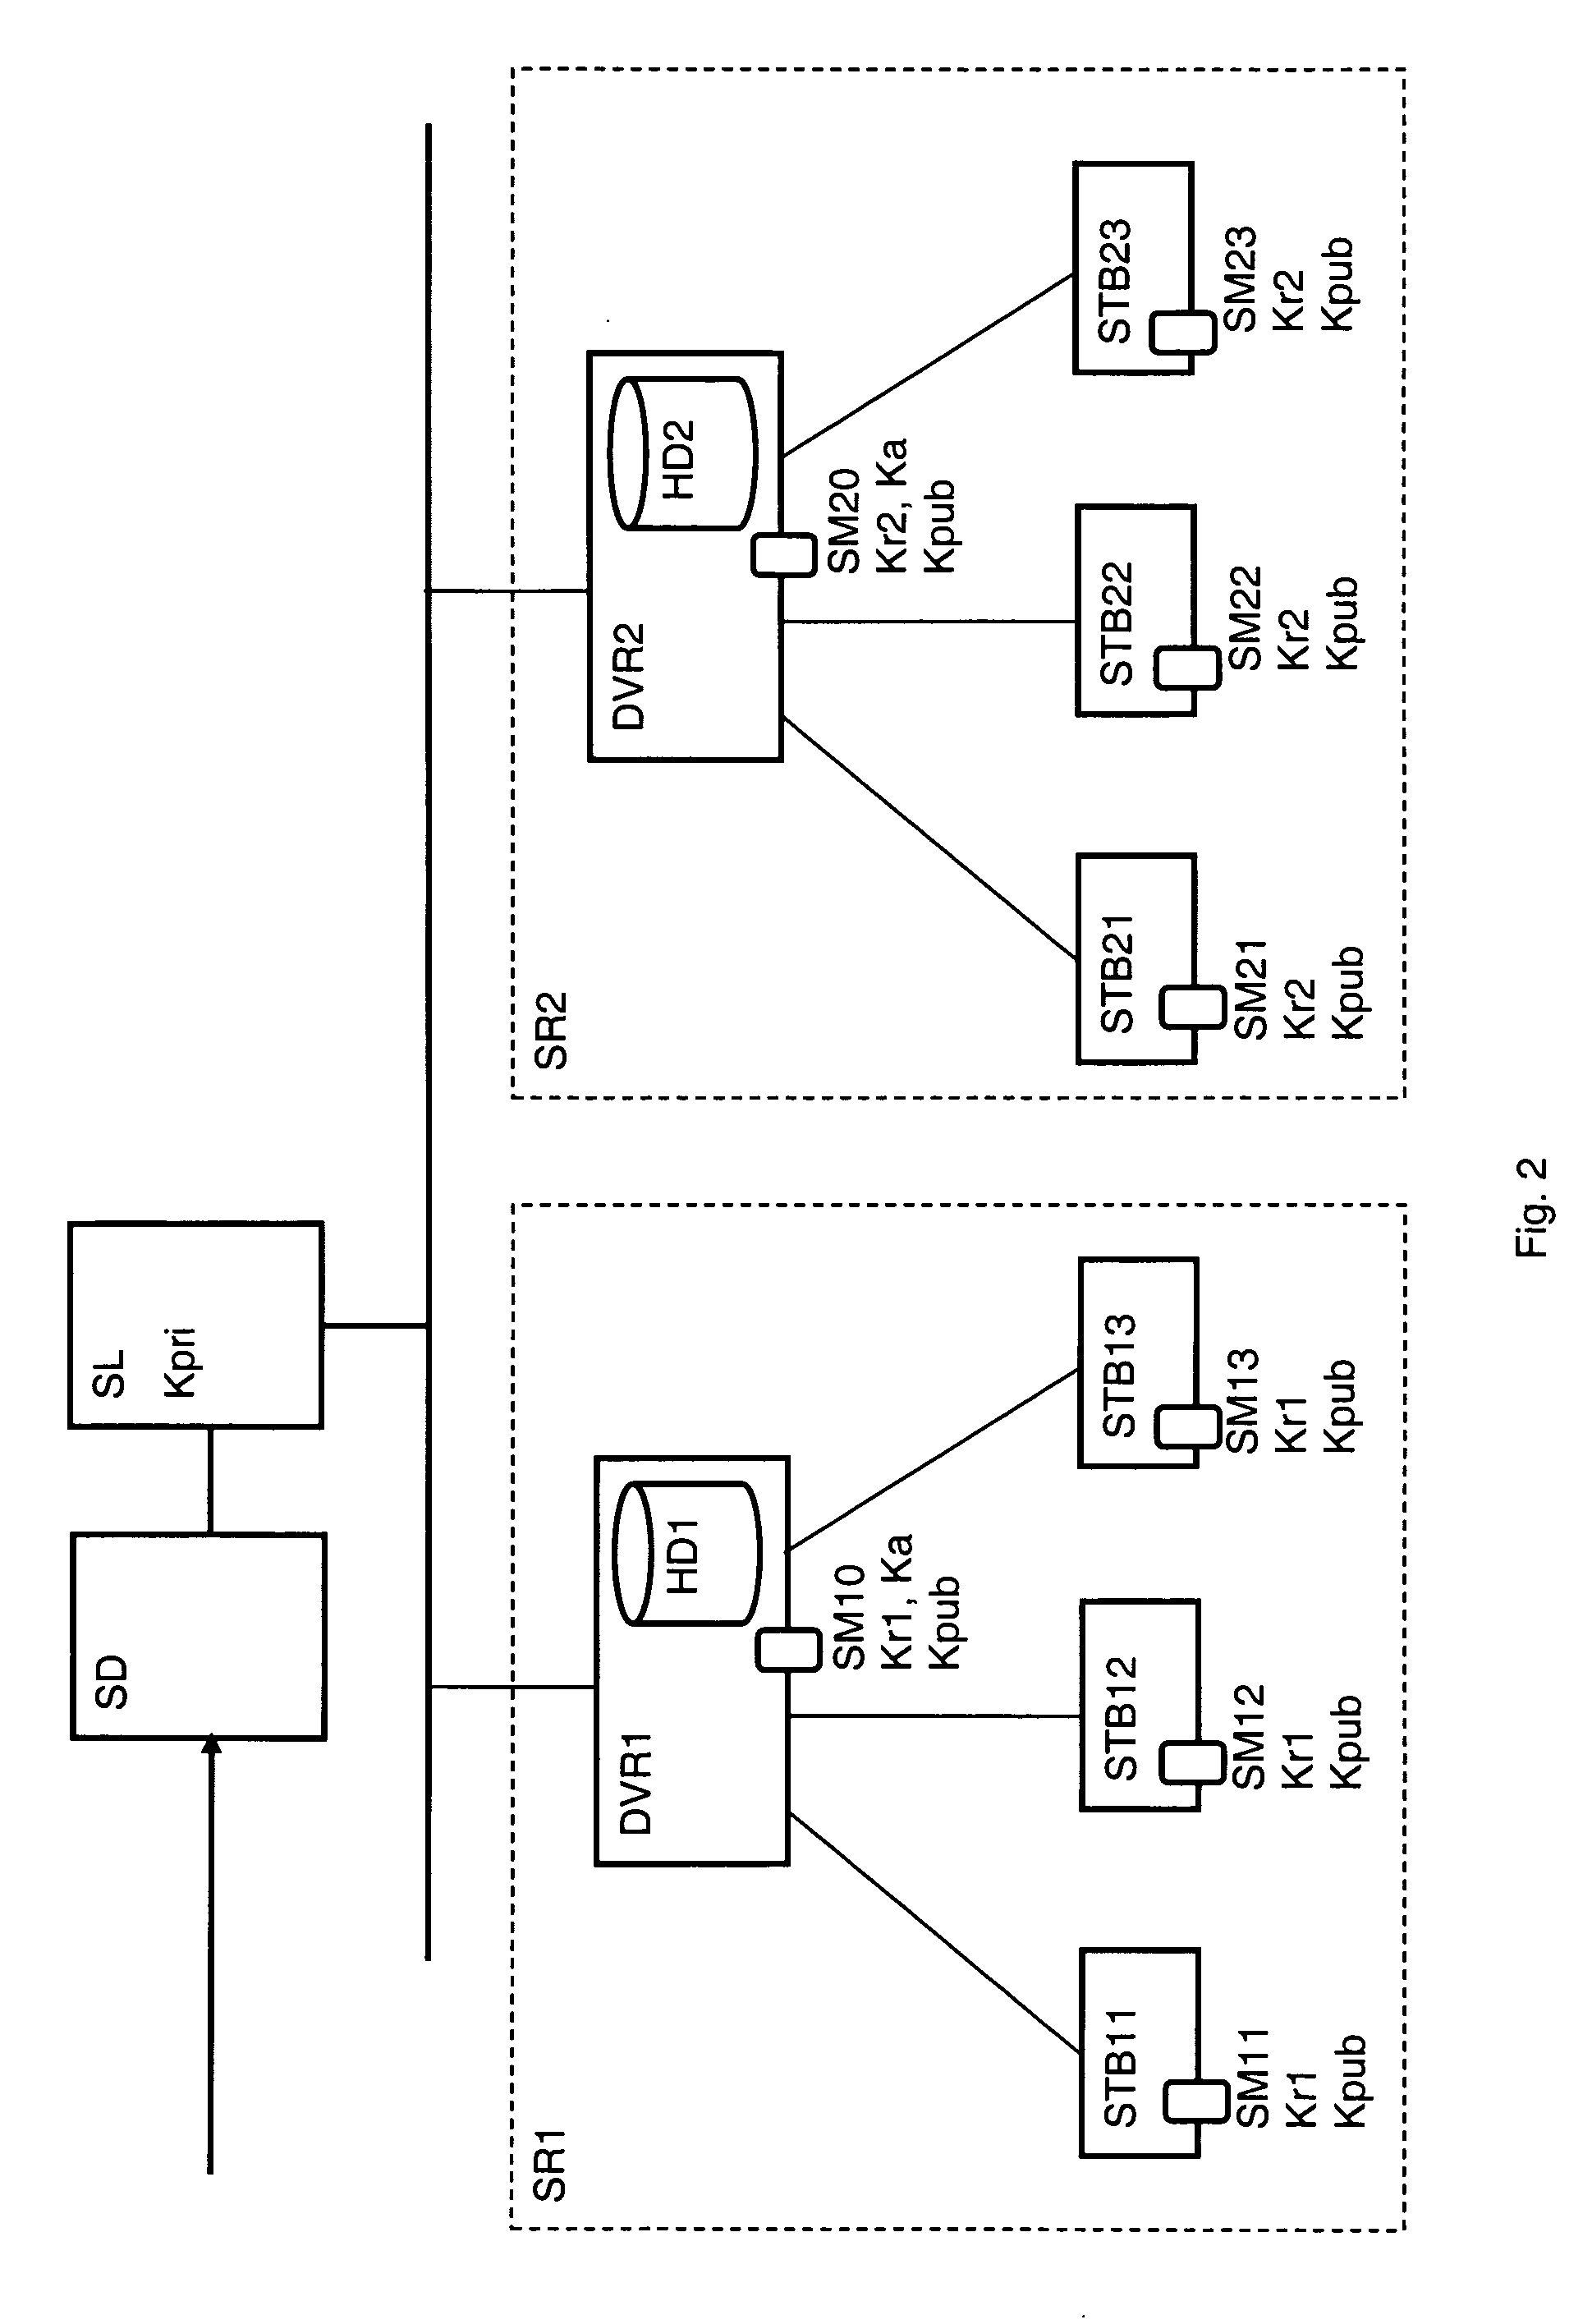 Method for transmitting digital data in a local network